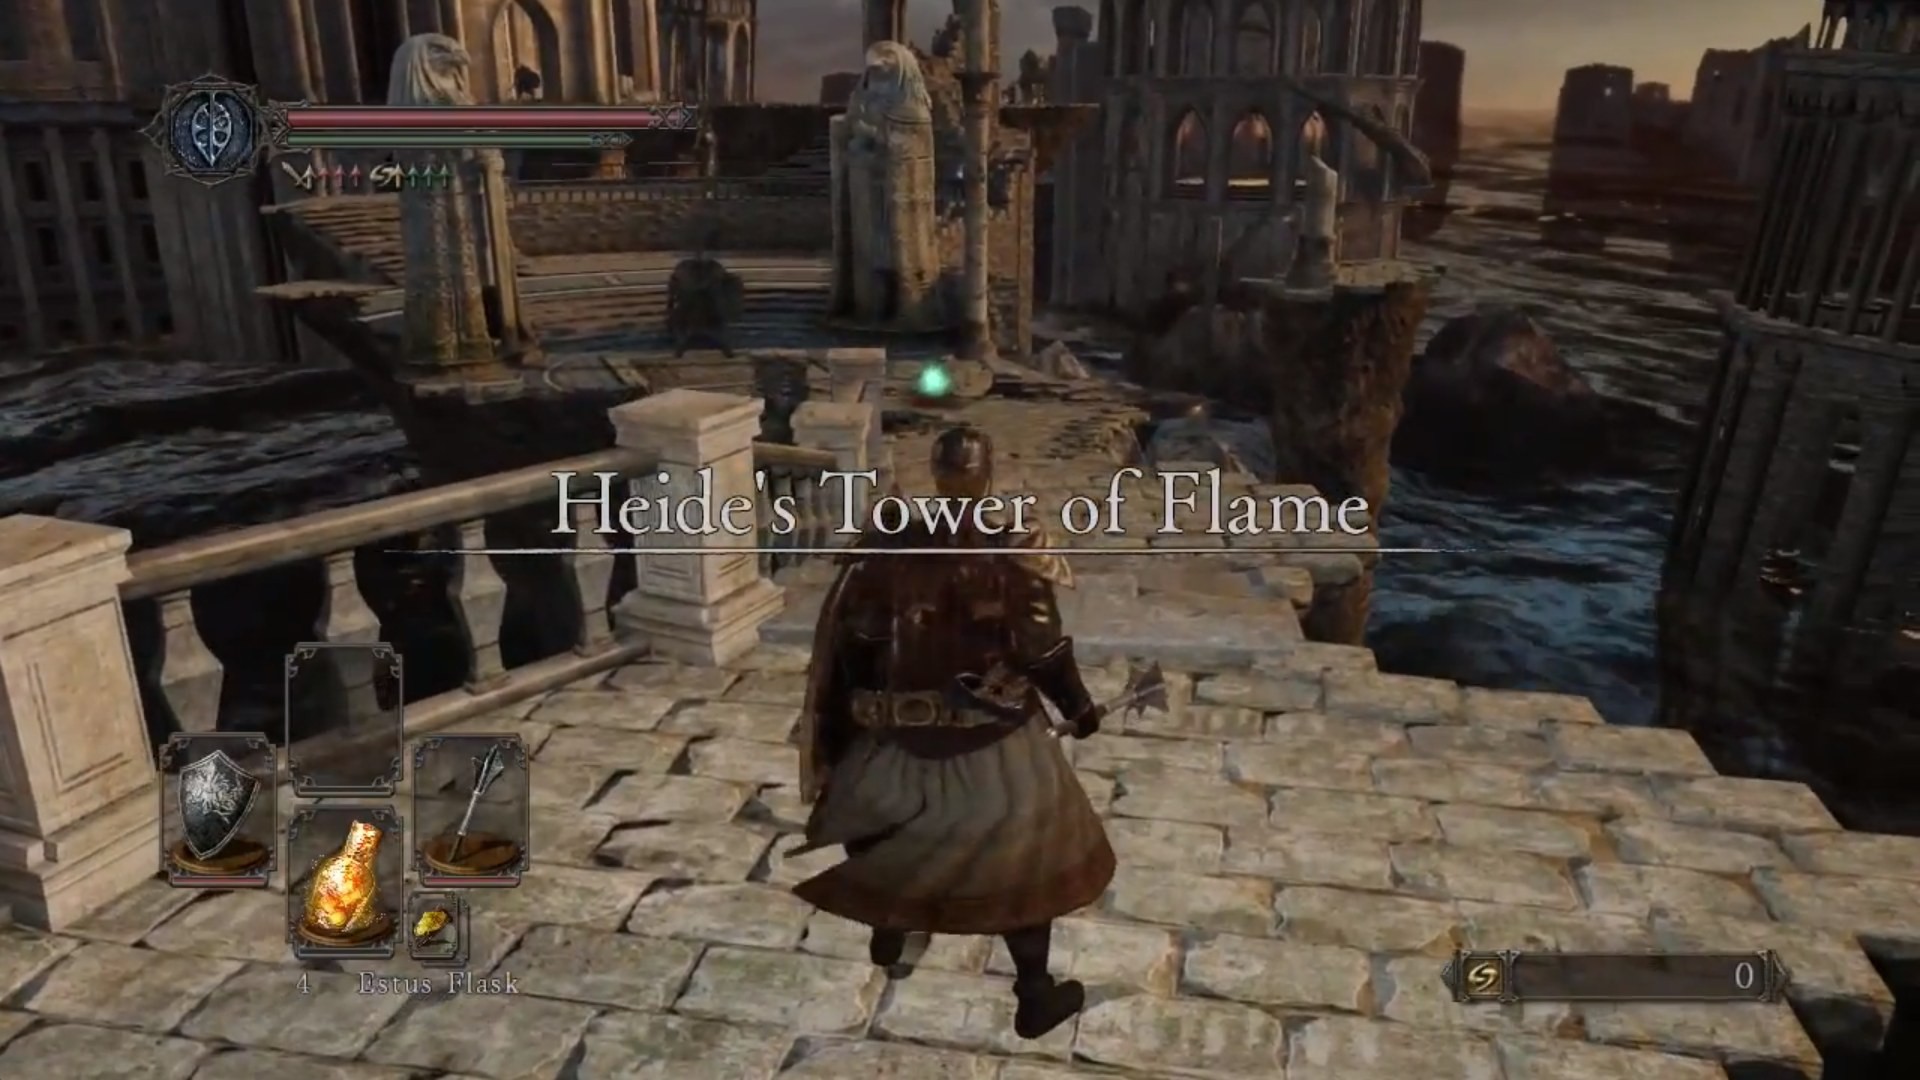 Geek insider, geekinsider, geekinsider. Com,, dark souls 2 walkthrough: heide’s tower of flame, how to